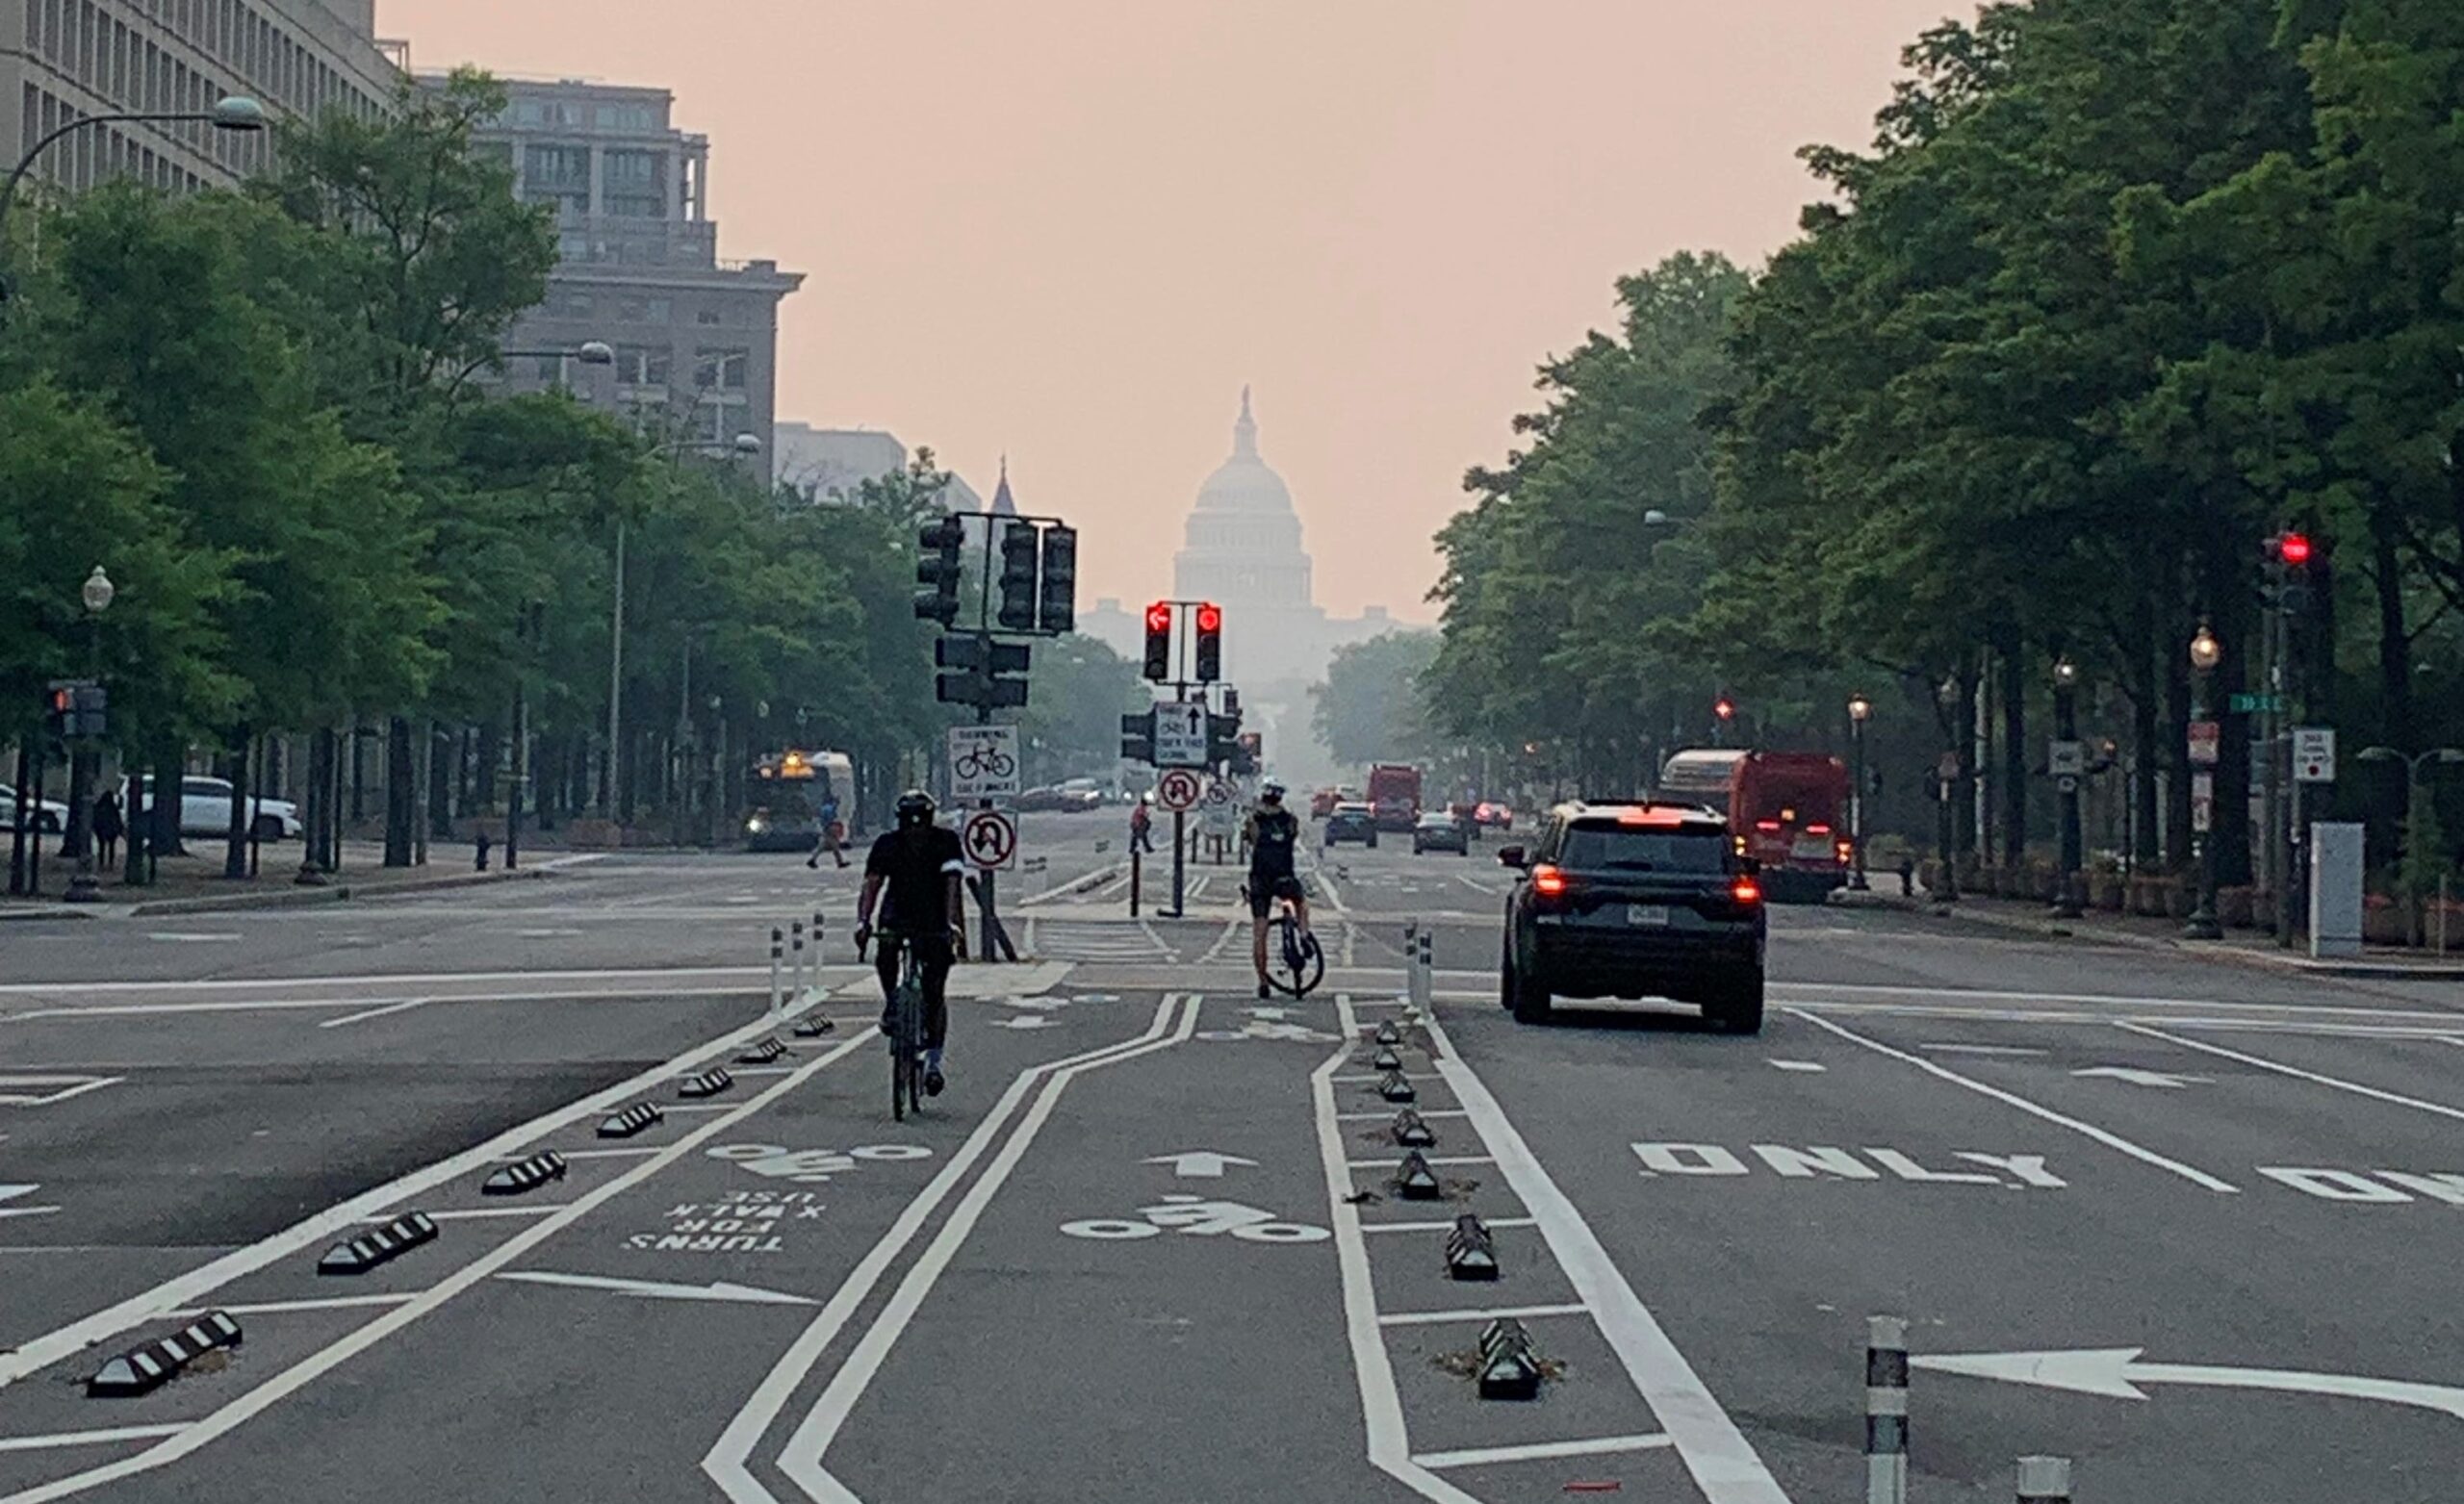 The U.S. Capitol building viewed from afar during the wildfire smoke event on June 7, 2023. Photo courtesy of Natasha Dacic.